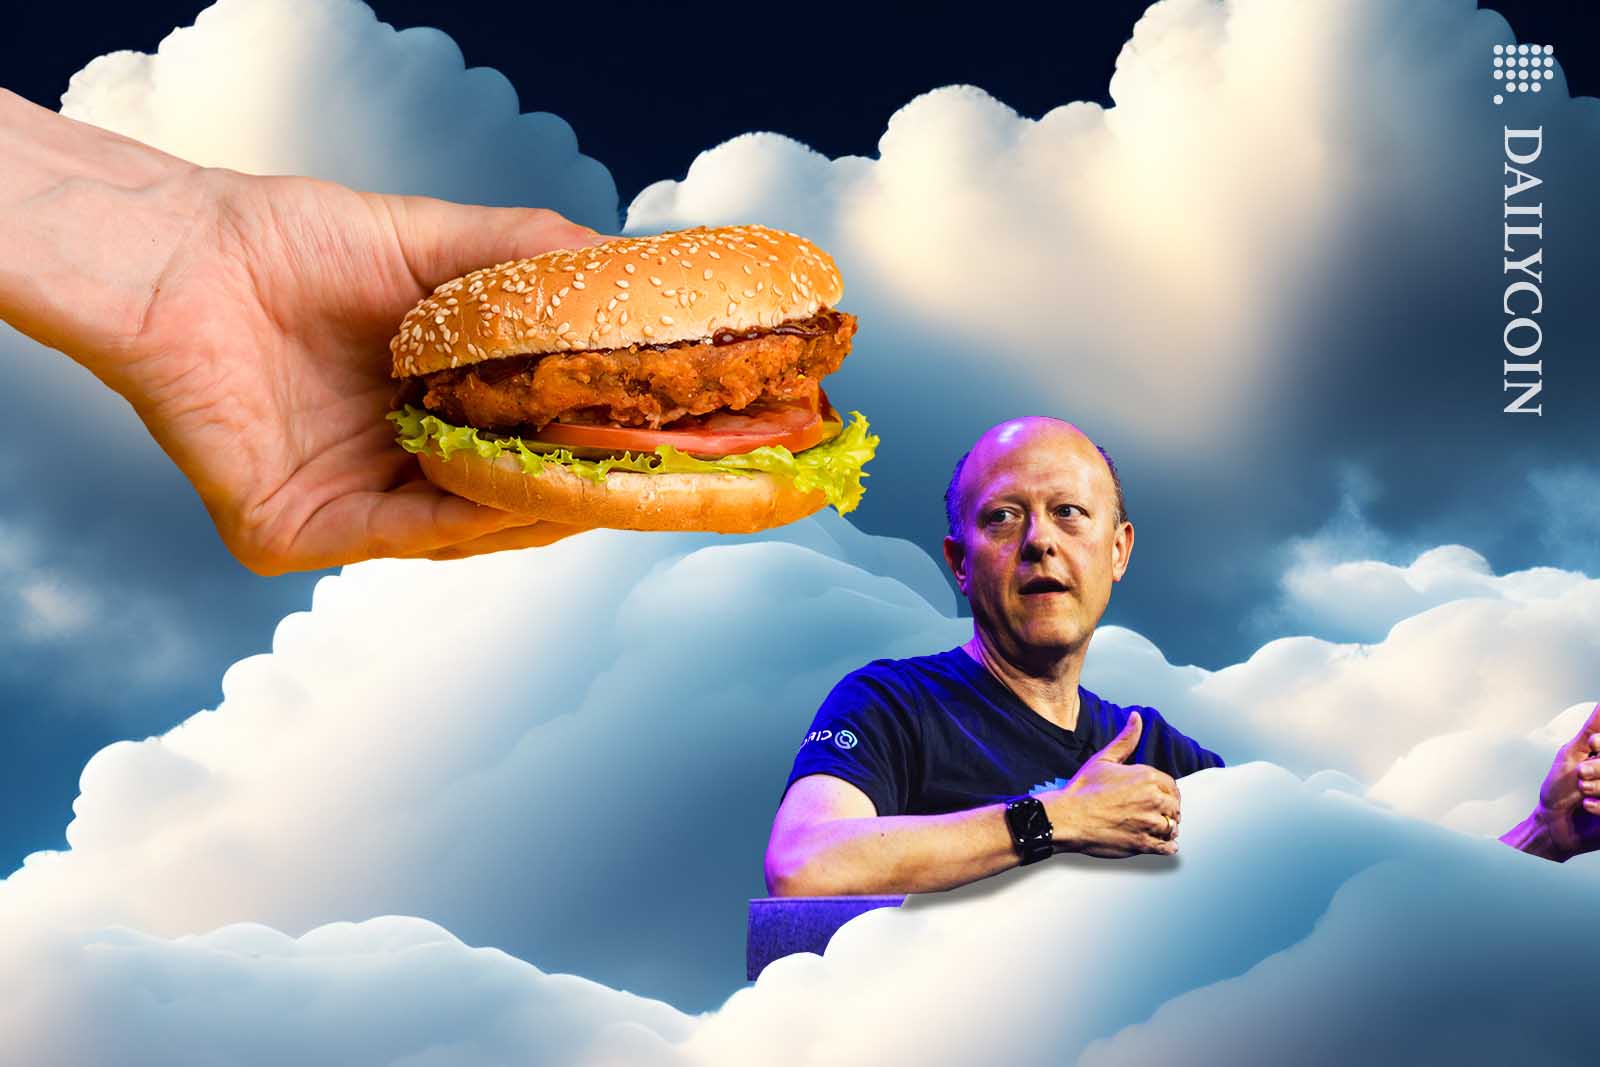 Jeremy Allaire staring at a burger appearing from the clouds.